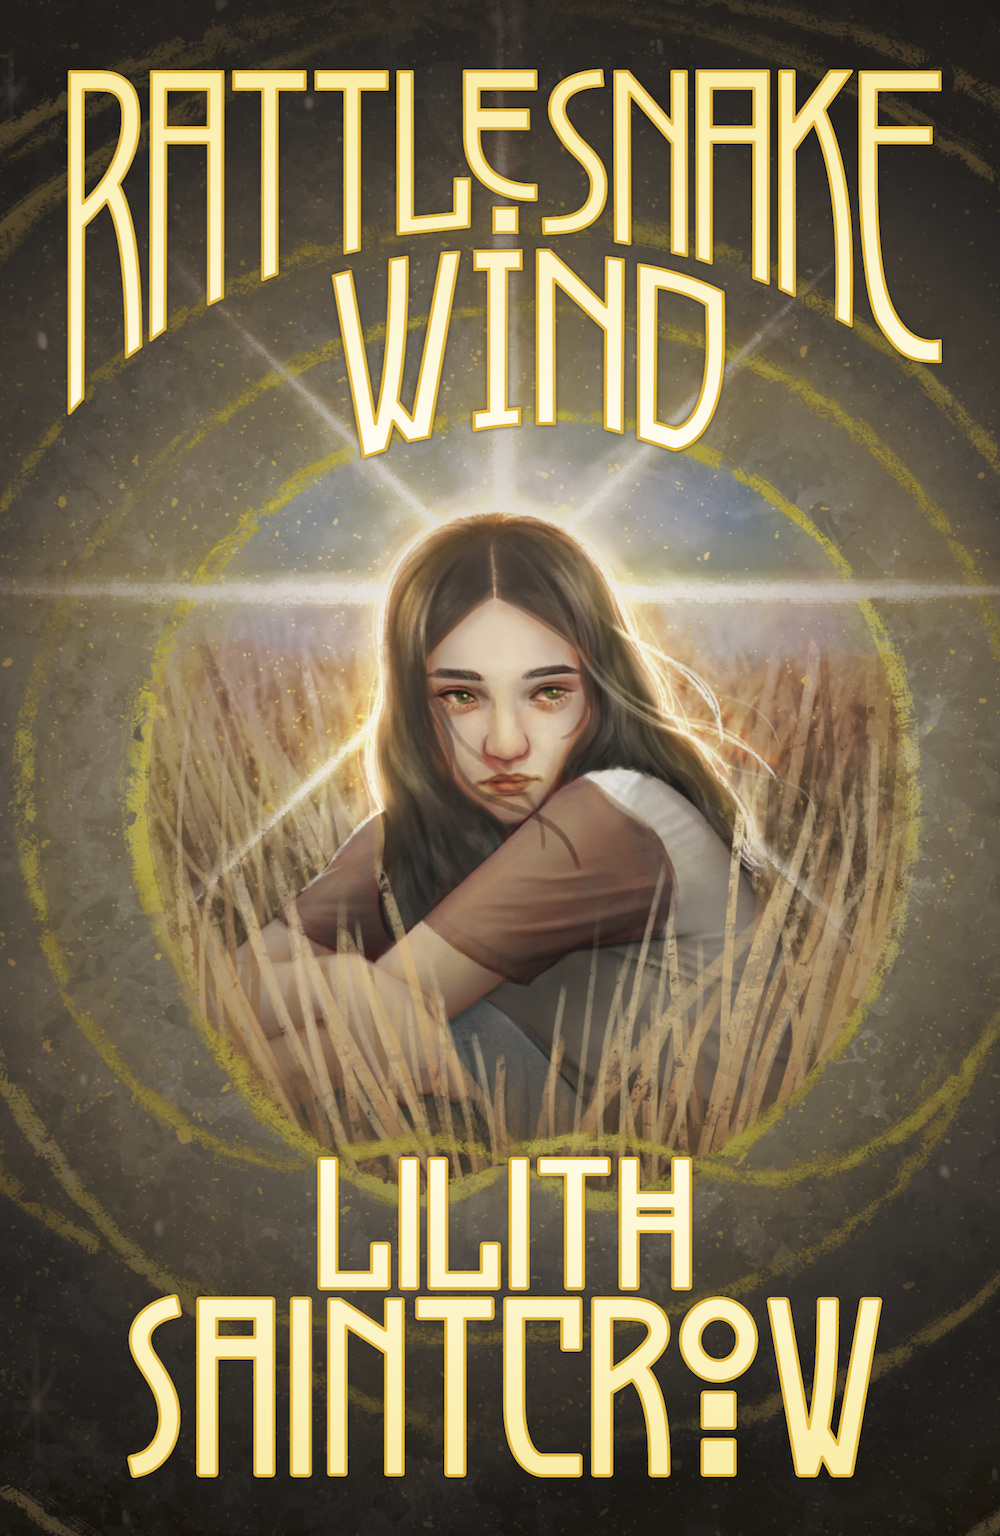 Front cover image for Rattlesnake Wind by Lilith Saintcrow